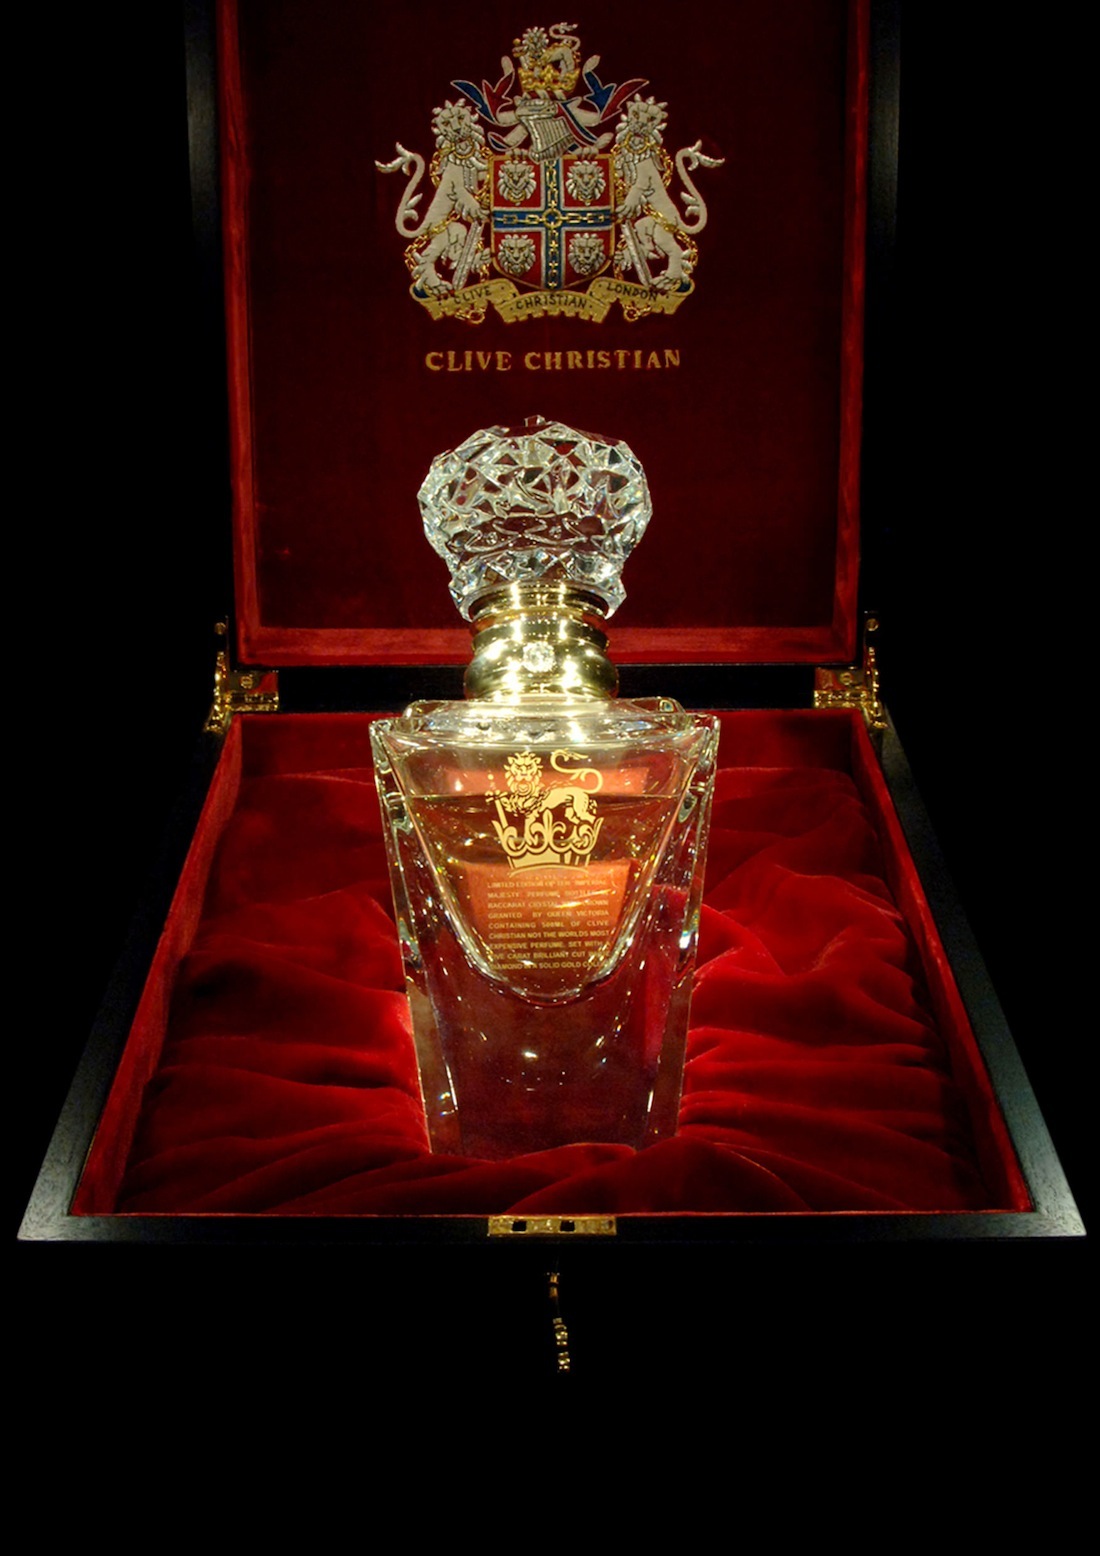 THE PERFUME OF CLIVE'S HEART: IMPERIAL MAJESTY – Clive Christian US